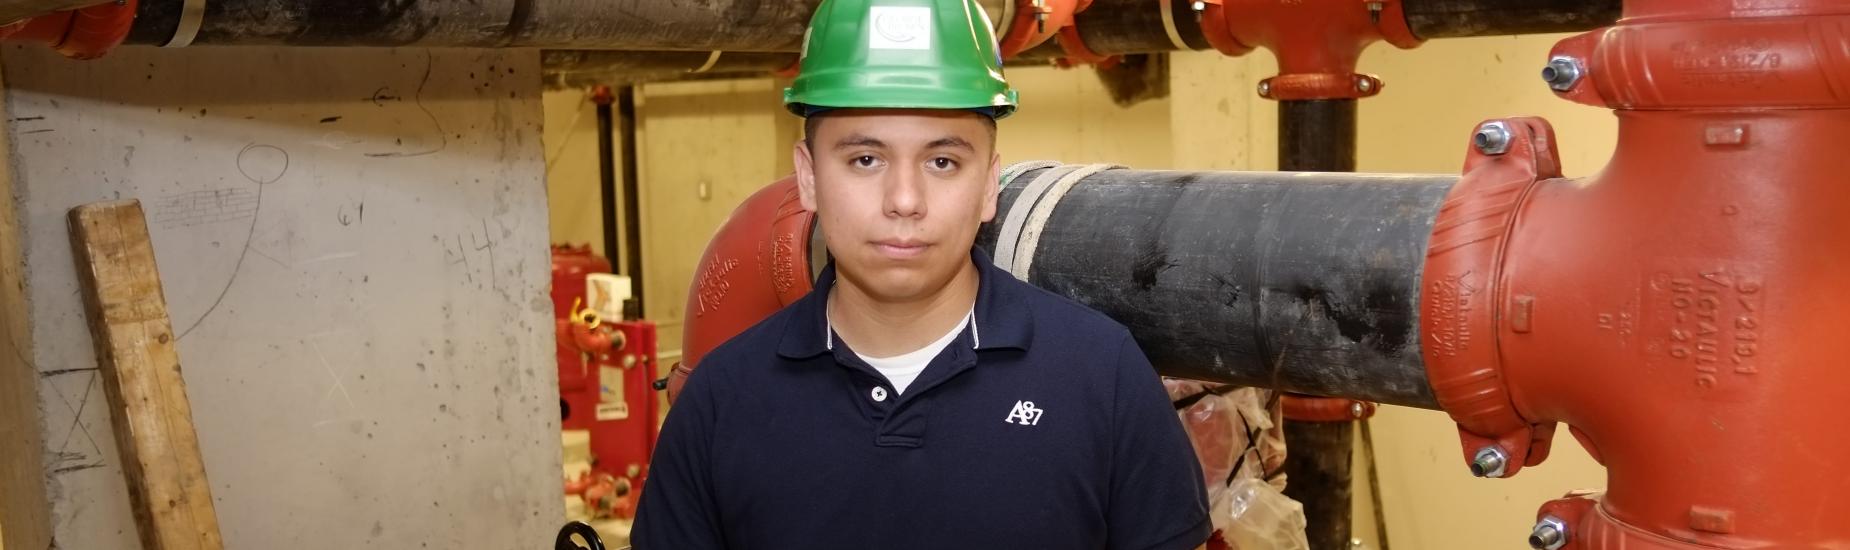 A male construction management student poses in a room with large red pipes while holding an architectural diagram and wearing a green hardhat.